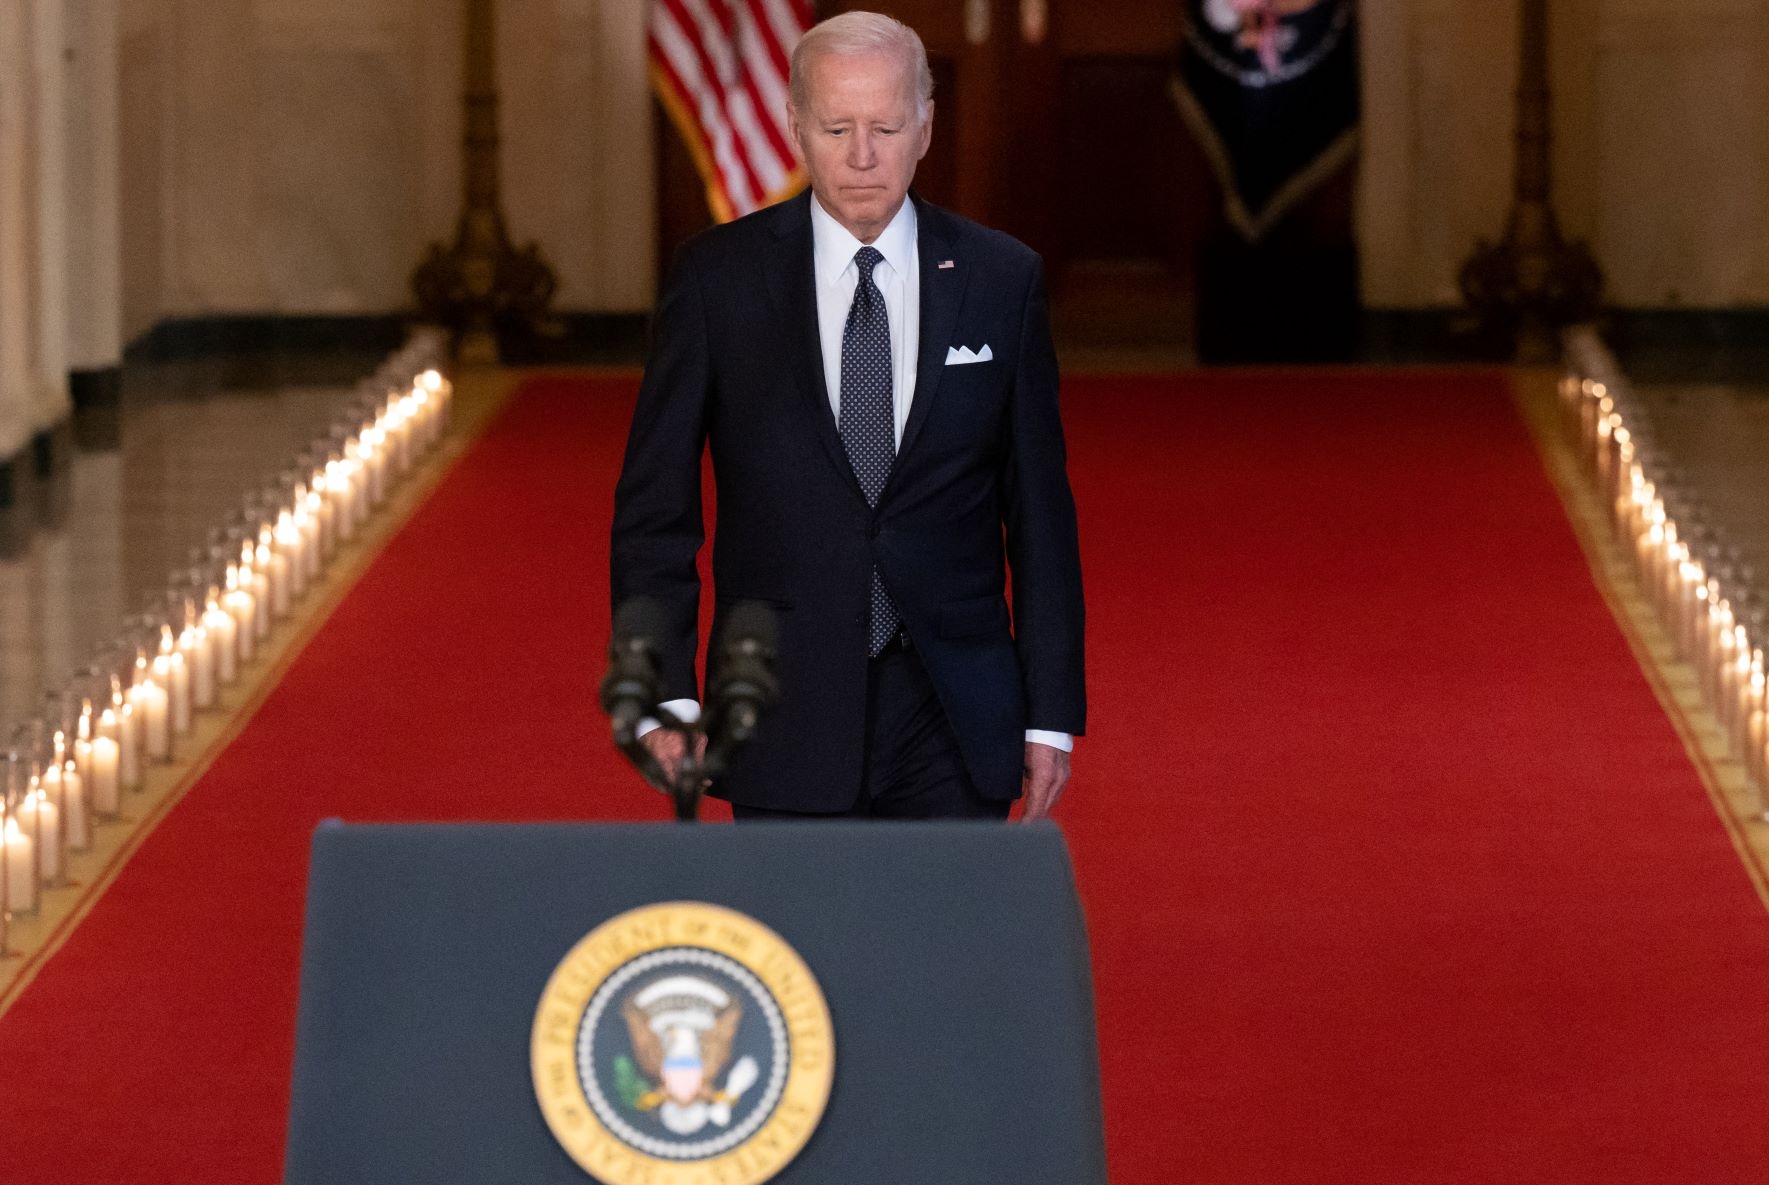 US President Joe Biden at the Cross Hall of the White House in Washington, DC, 2 June 2022 (AFP)